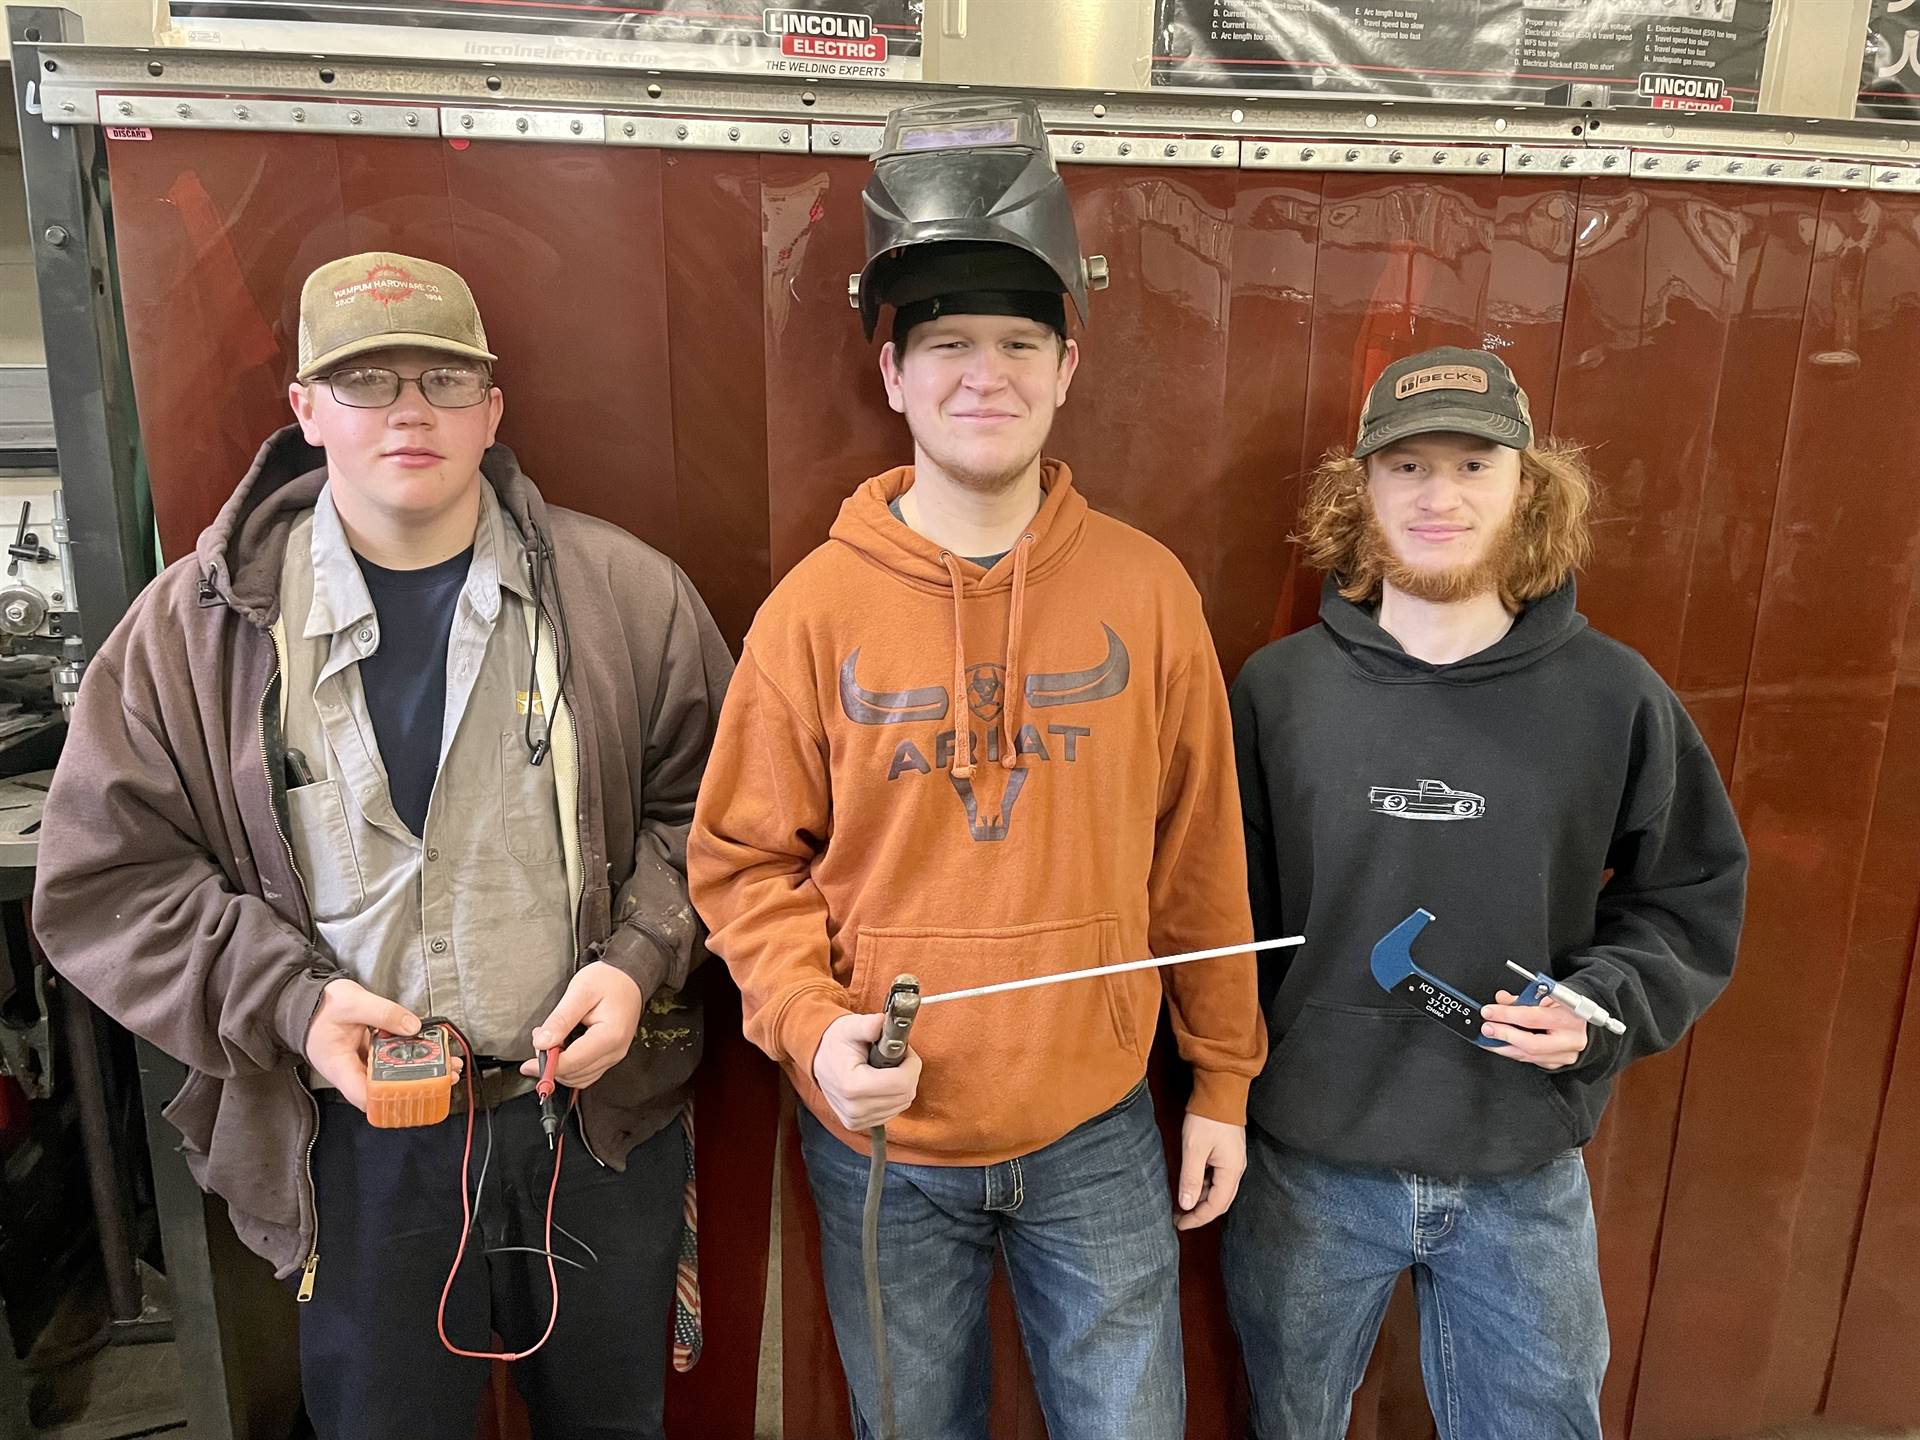 District Agriculture Mechanic Skills Contest